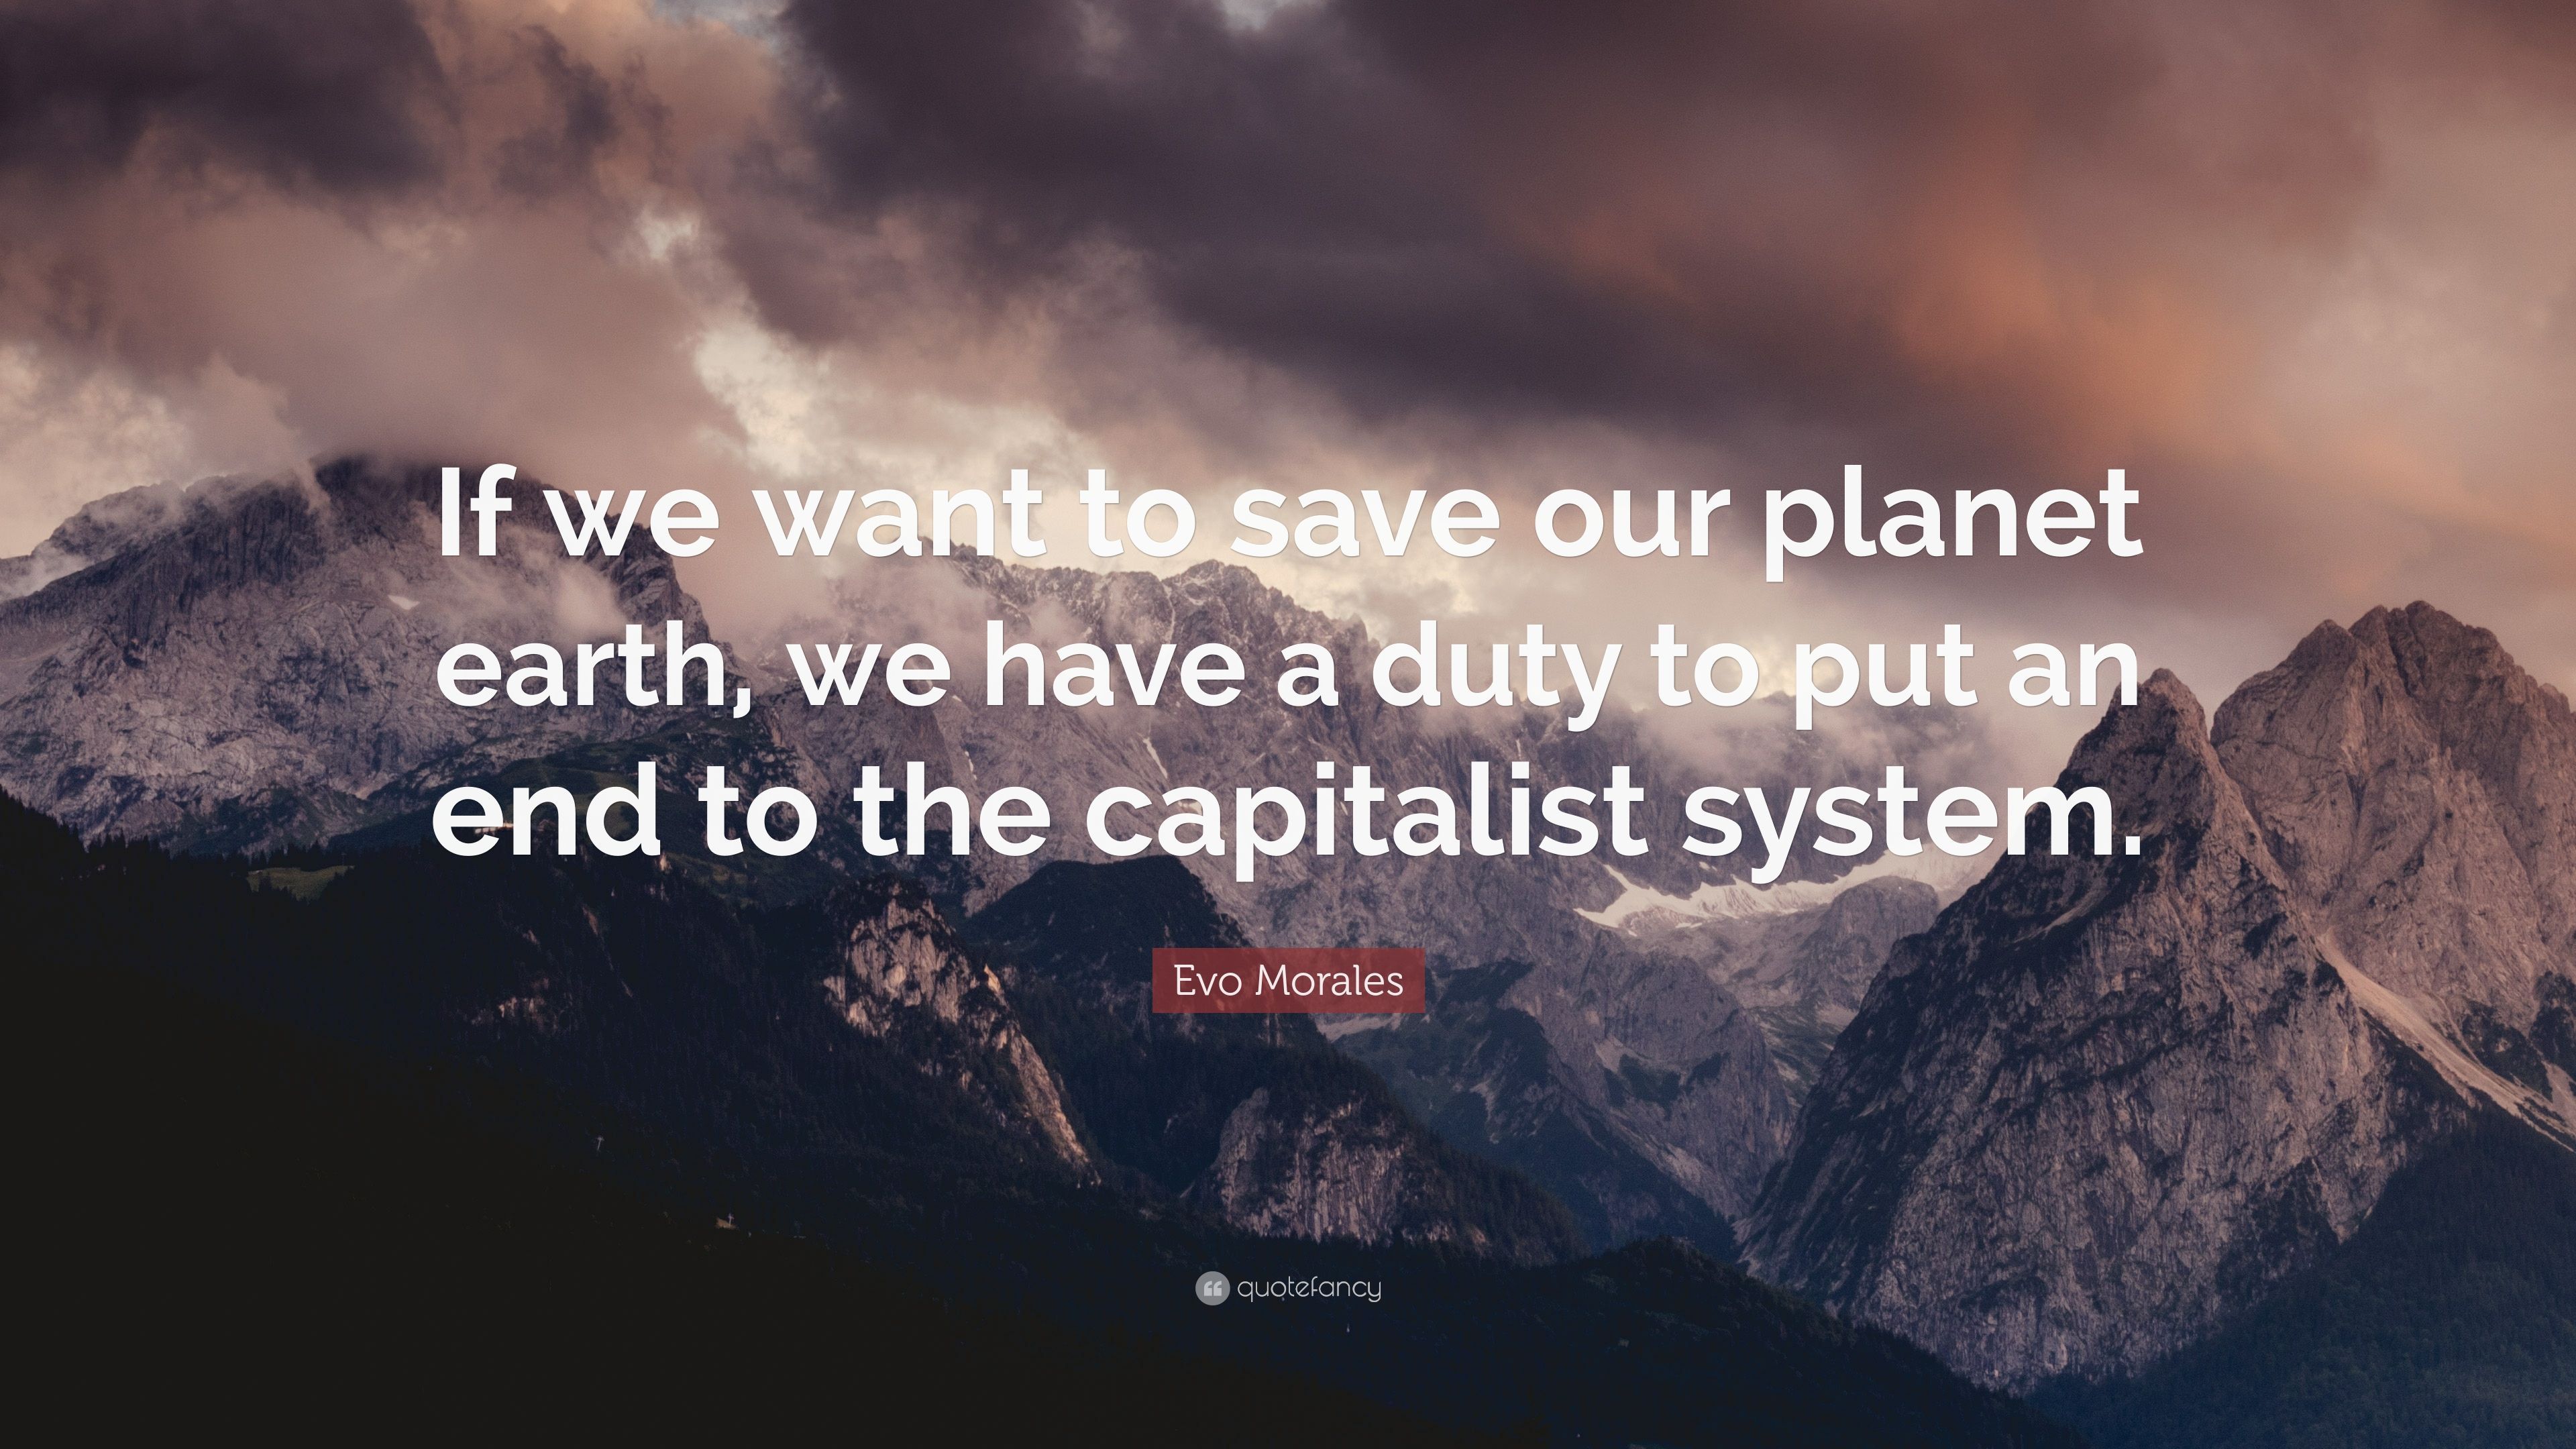 Evo Morales Quote: “If we want to save our planet earth, we have a